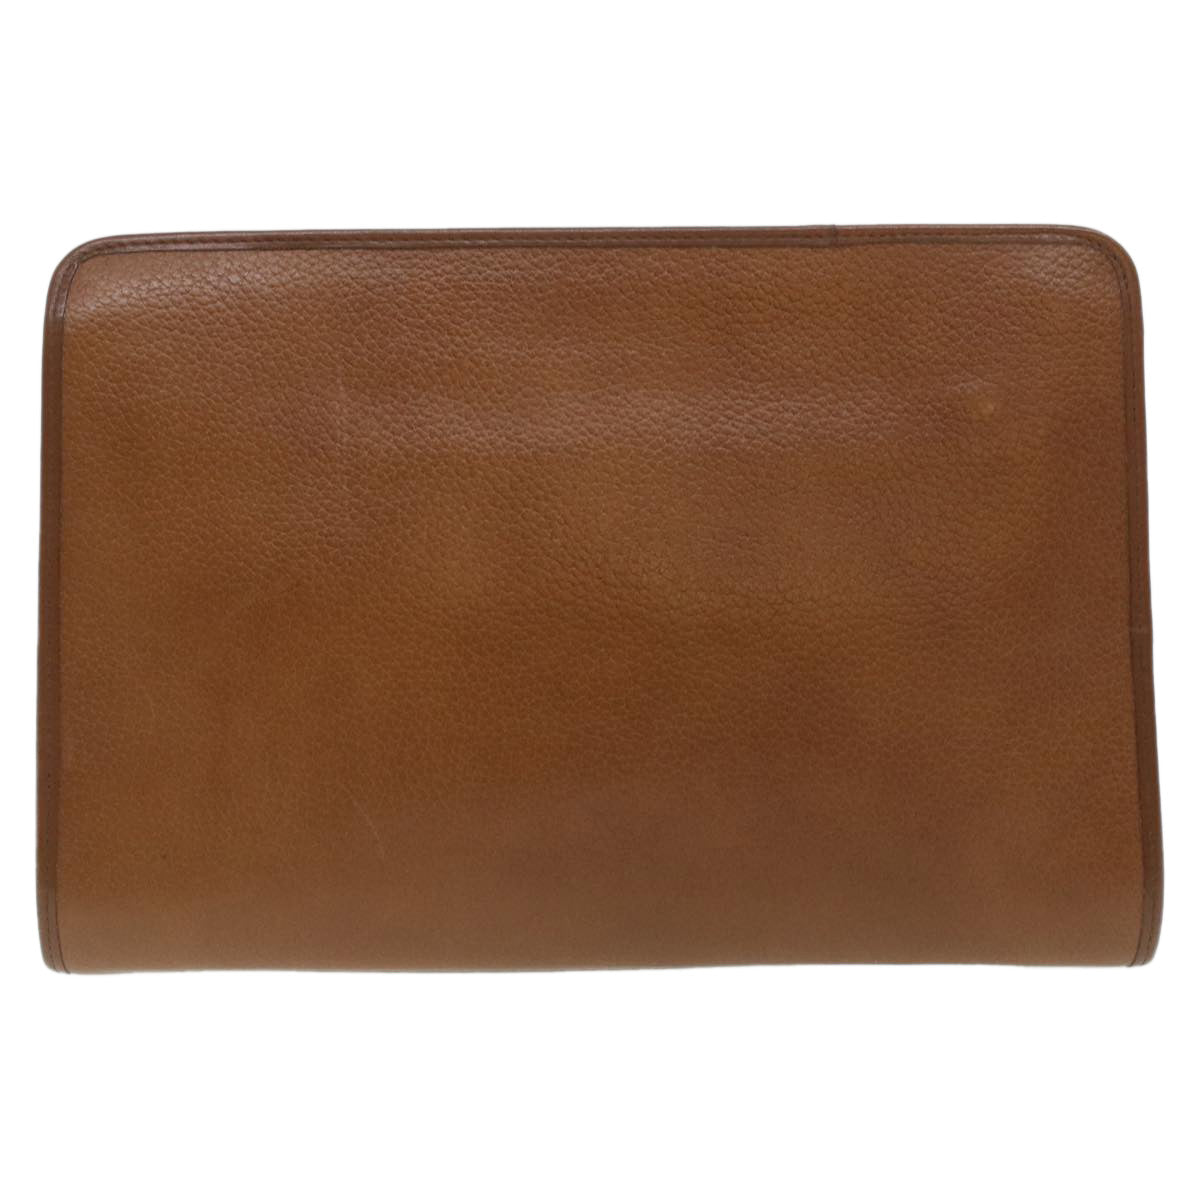 Burberrys Clutch Bag Leather Brown Auth bs4313